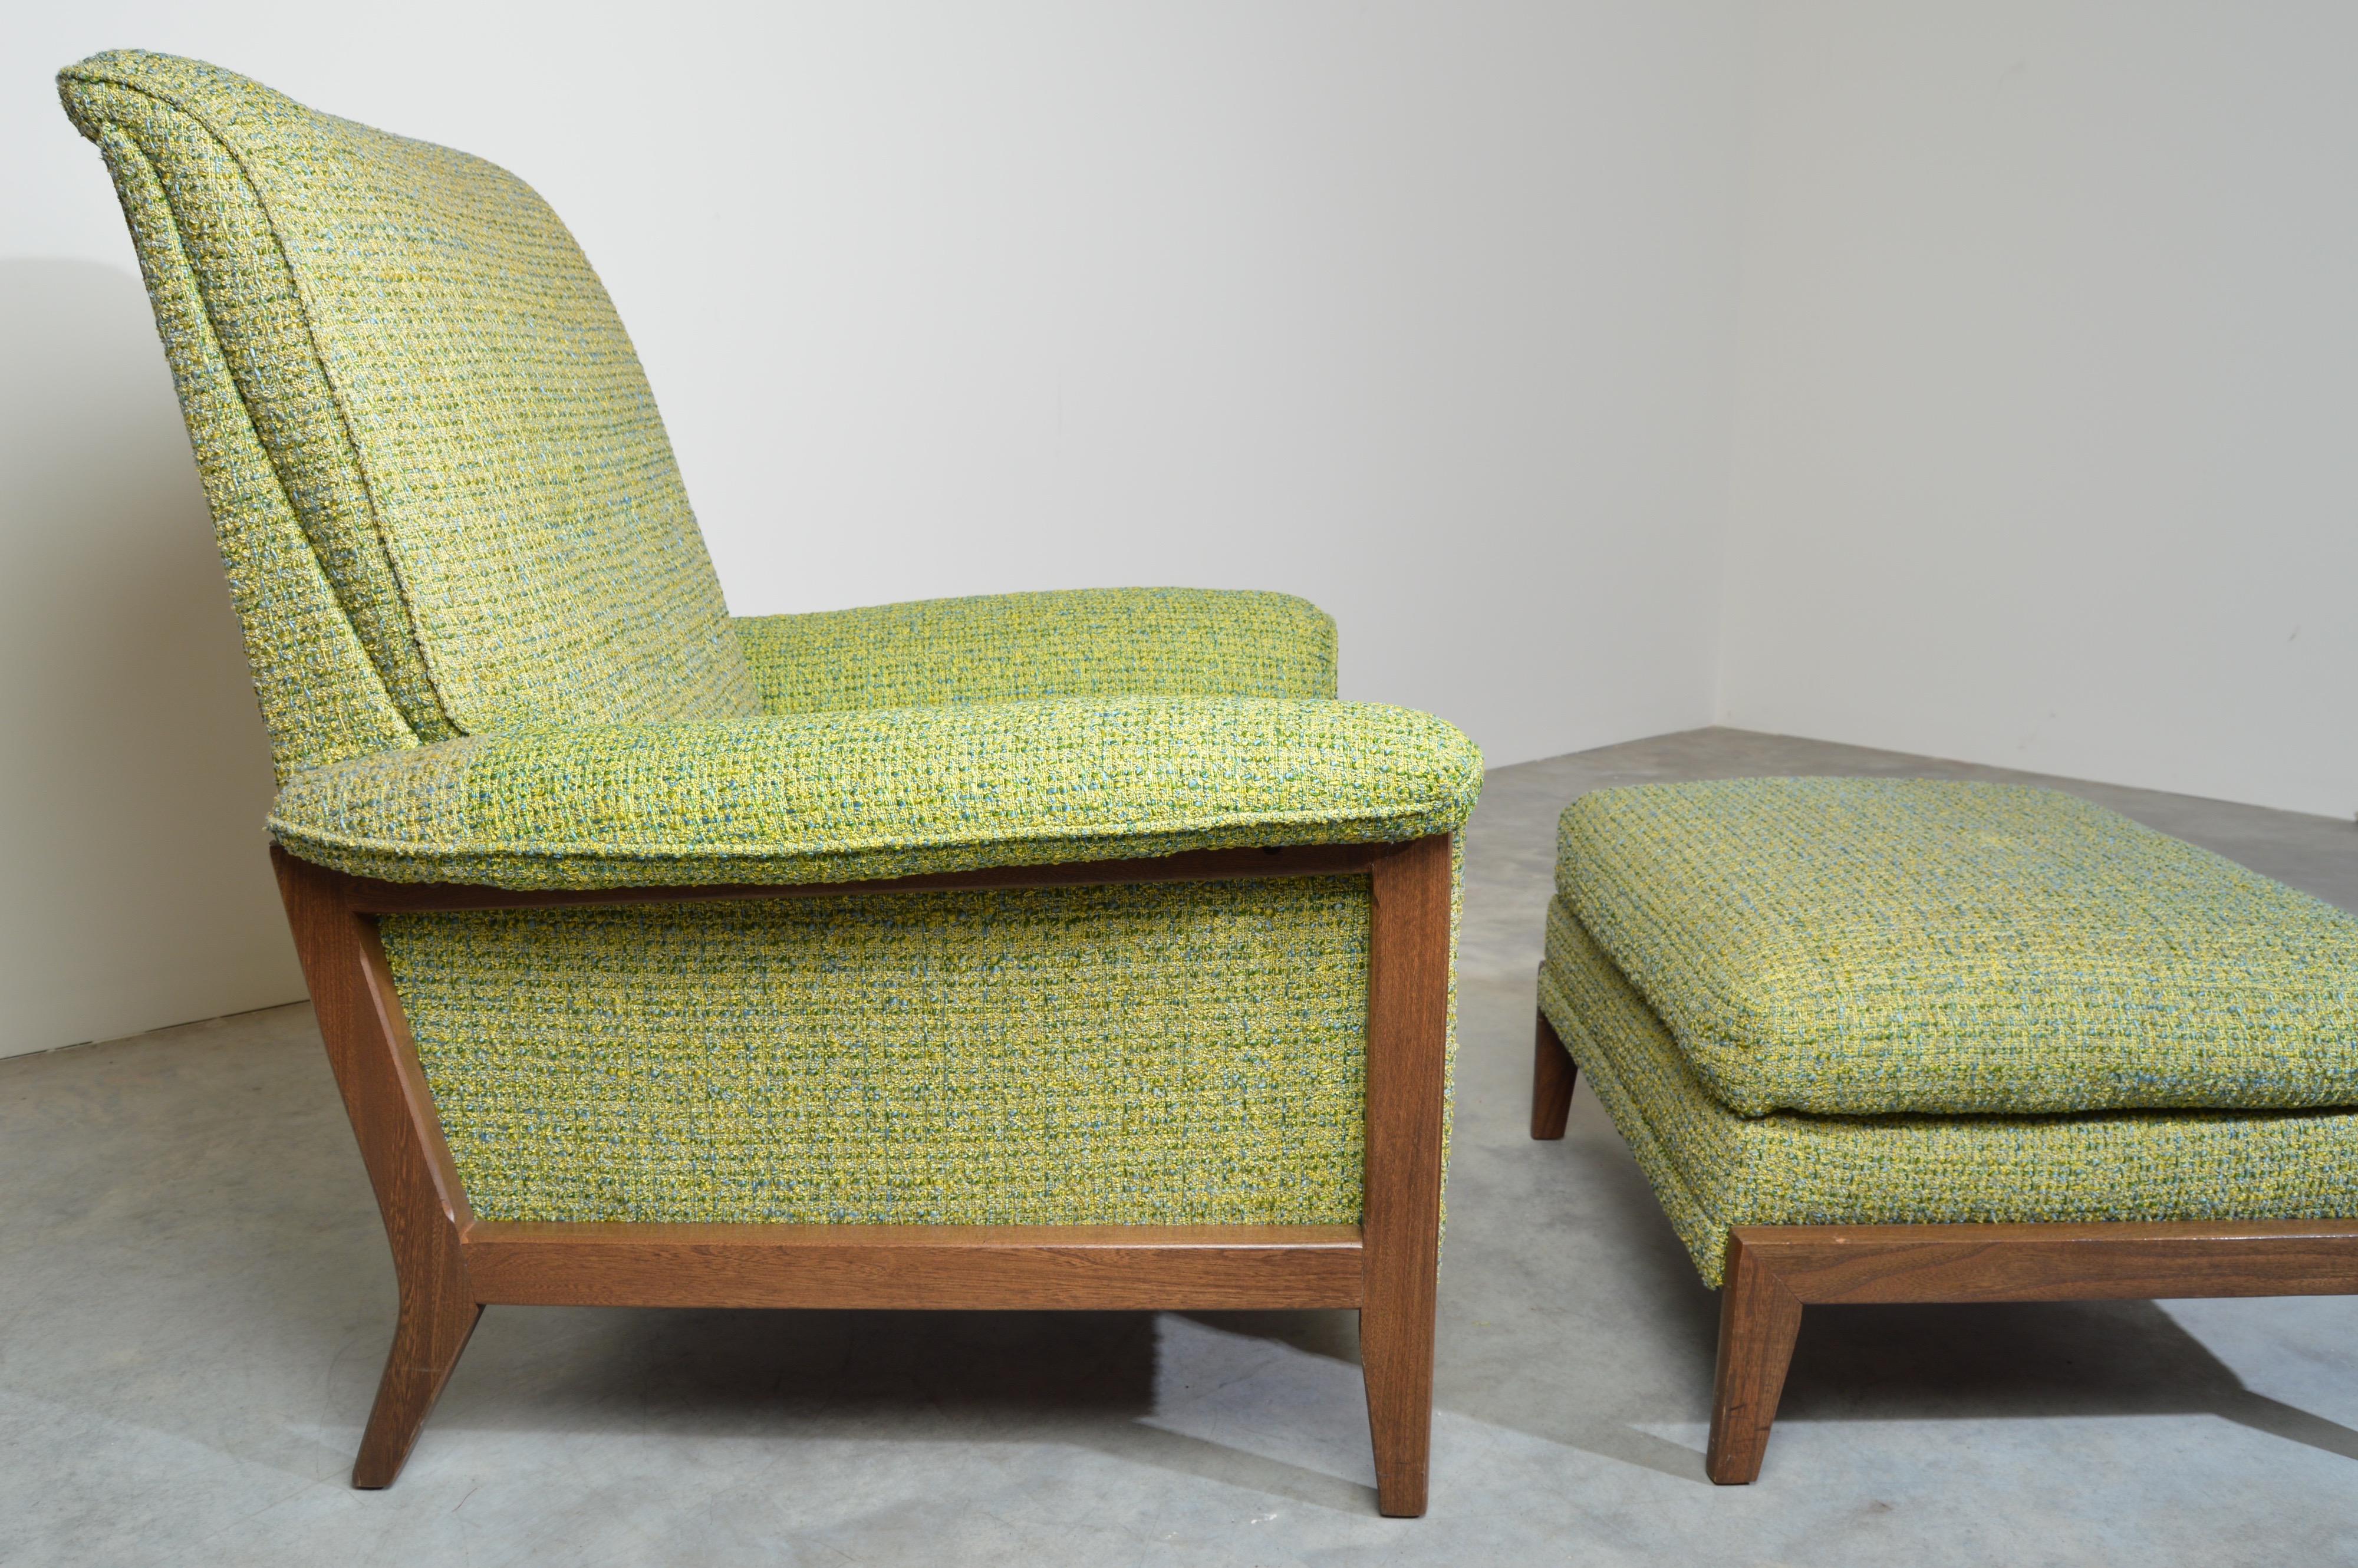 American Midcentury Lounge Chair and Ottoman by Kroehler after Paul McCobb